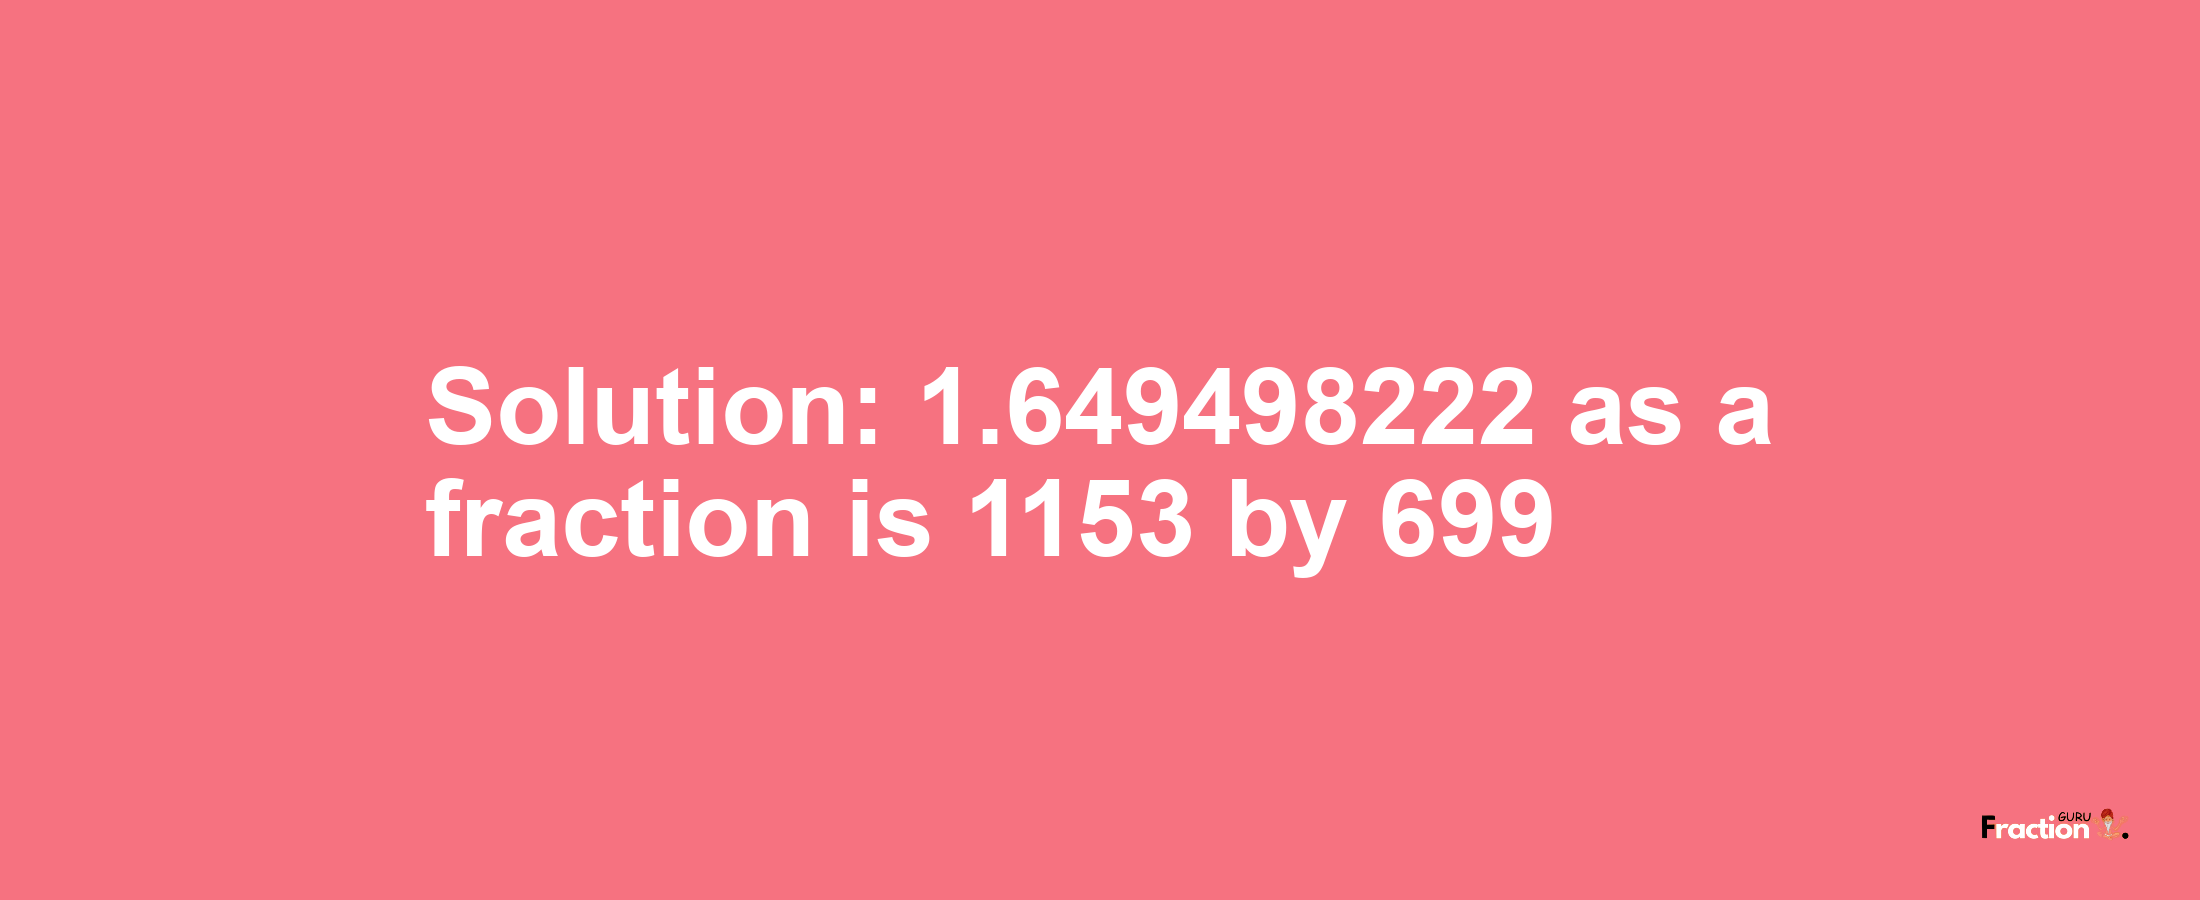 Solution:1.649498222 as a fraction is 1153/699